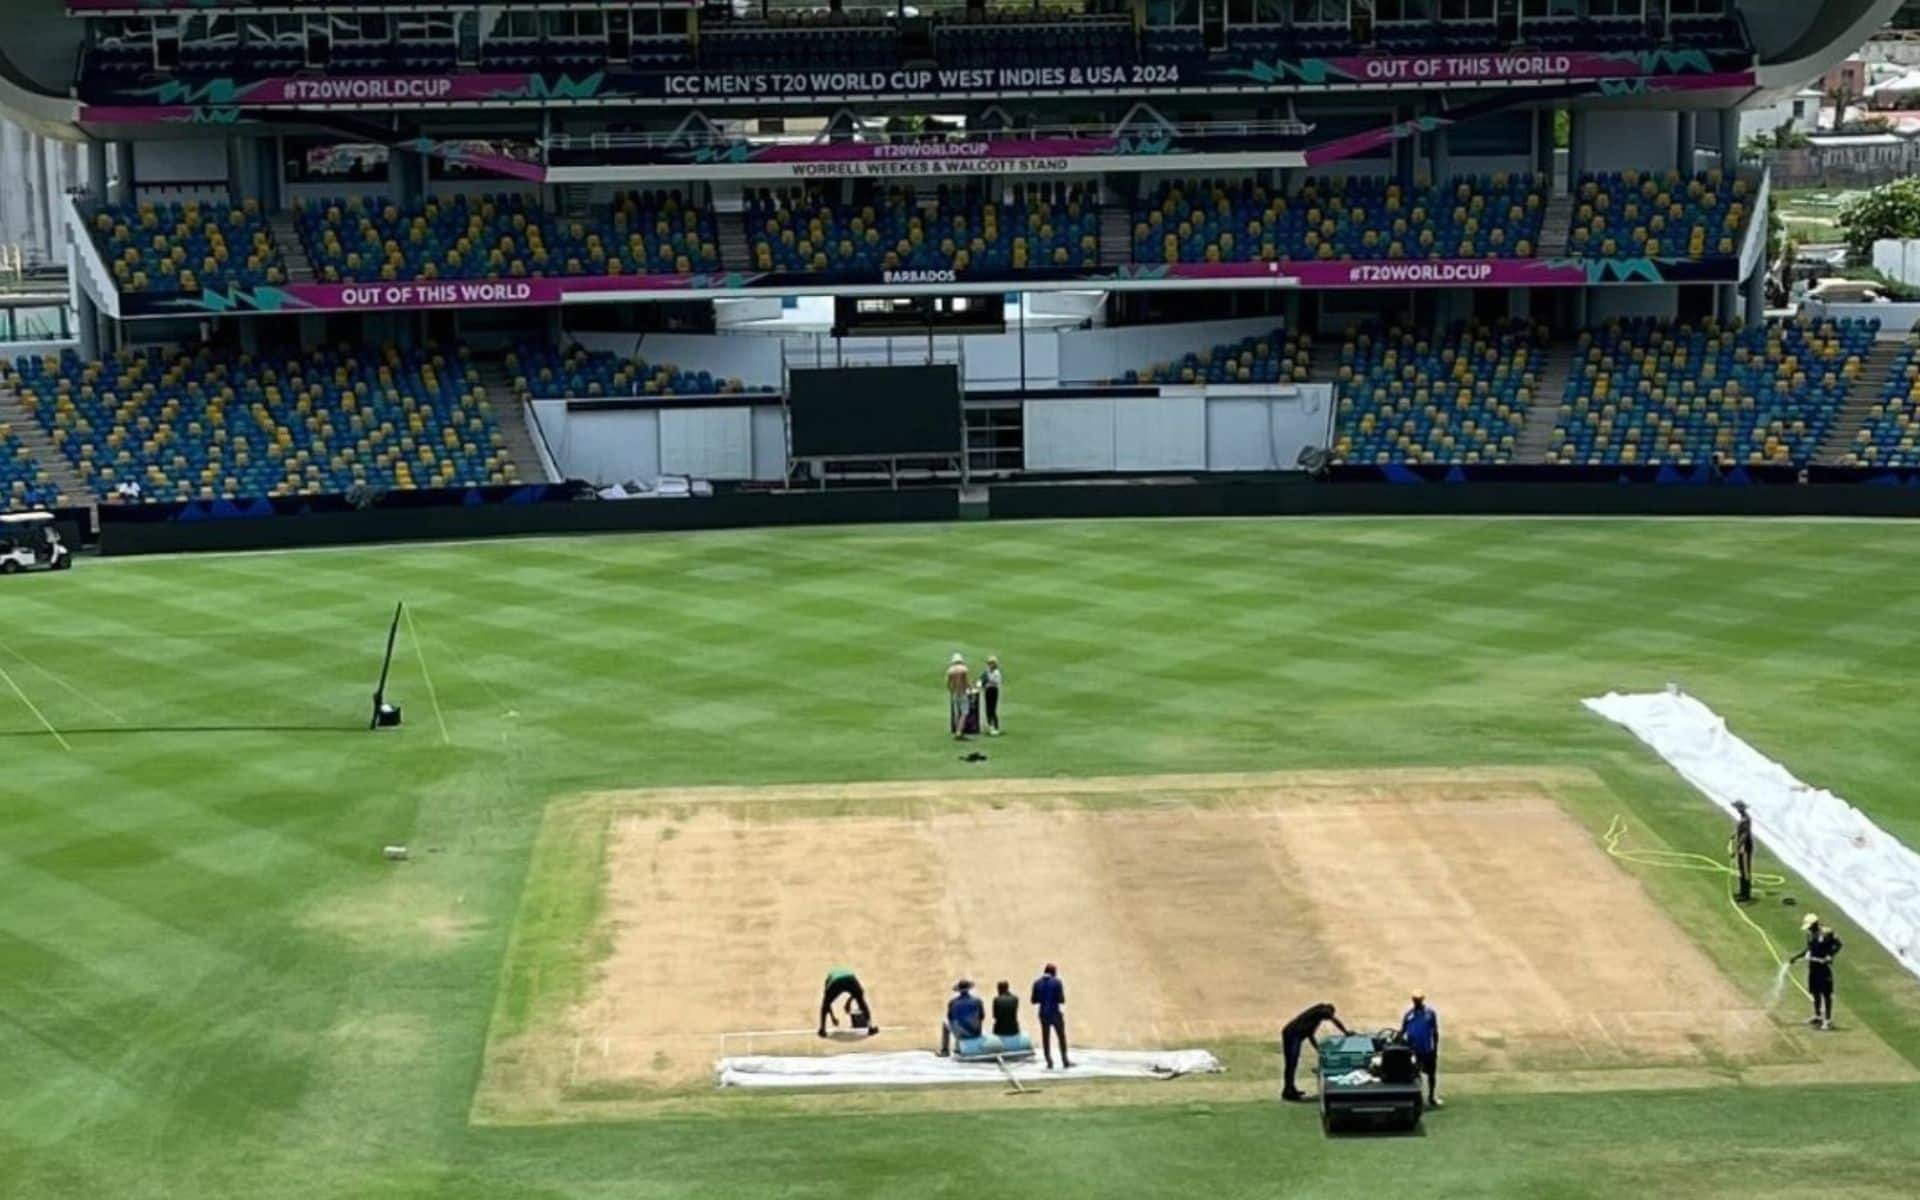 Kensington Oval Barbados Pitch Report For AFG Vs IND T20 World Cup Match